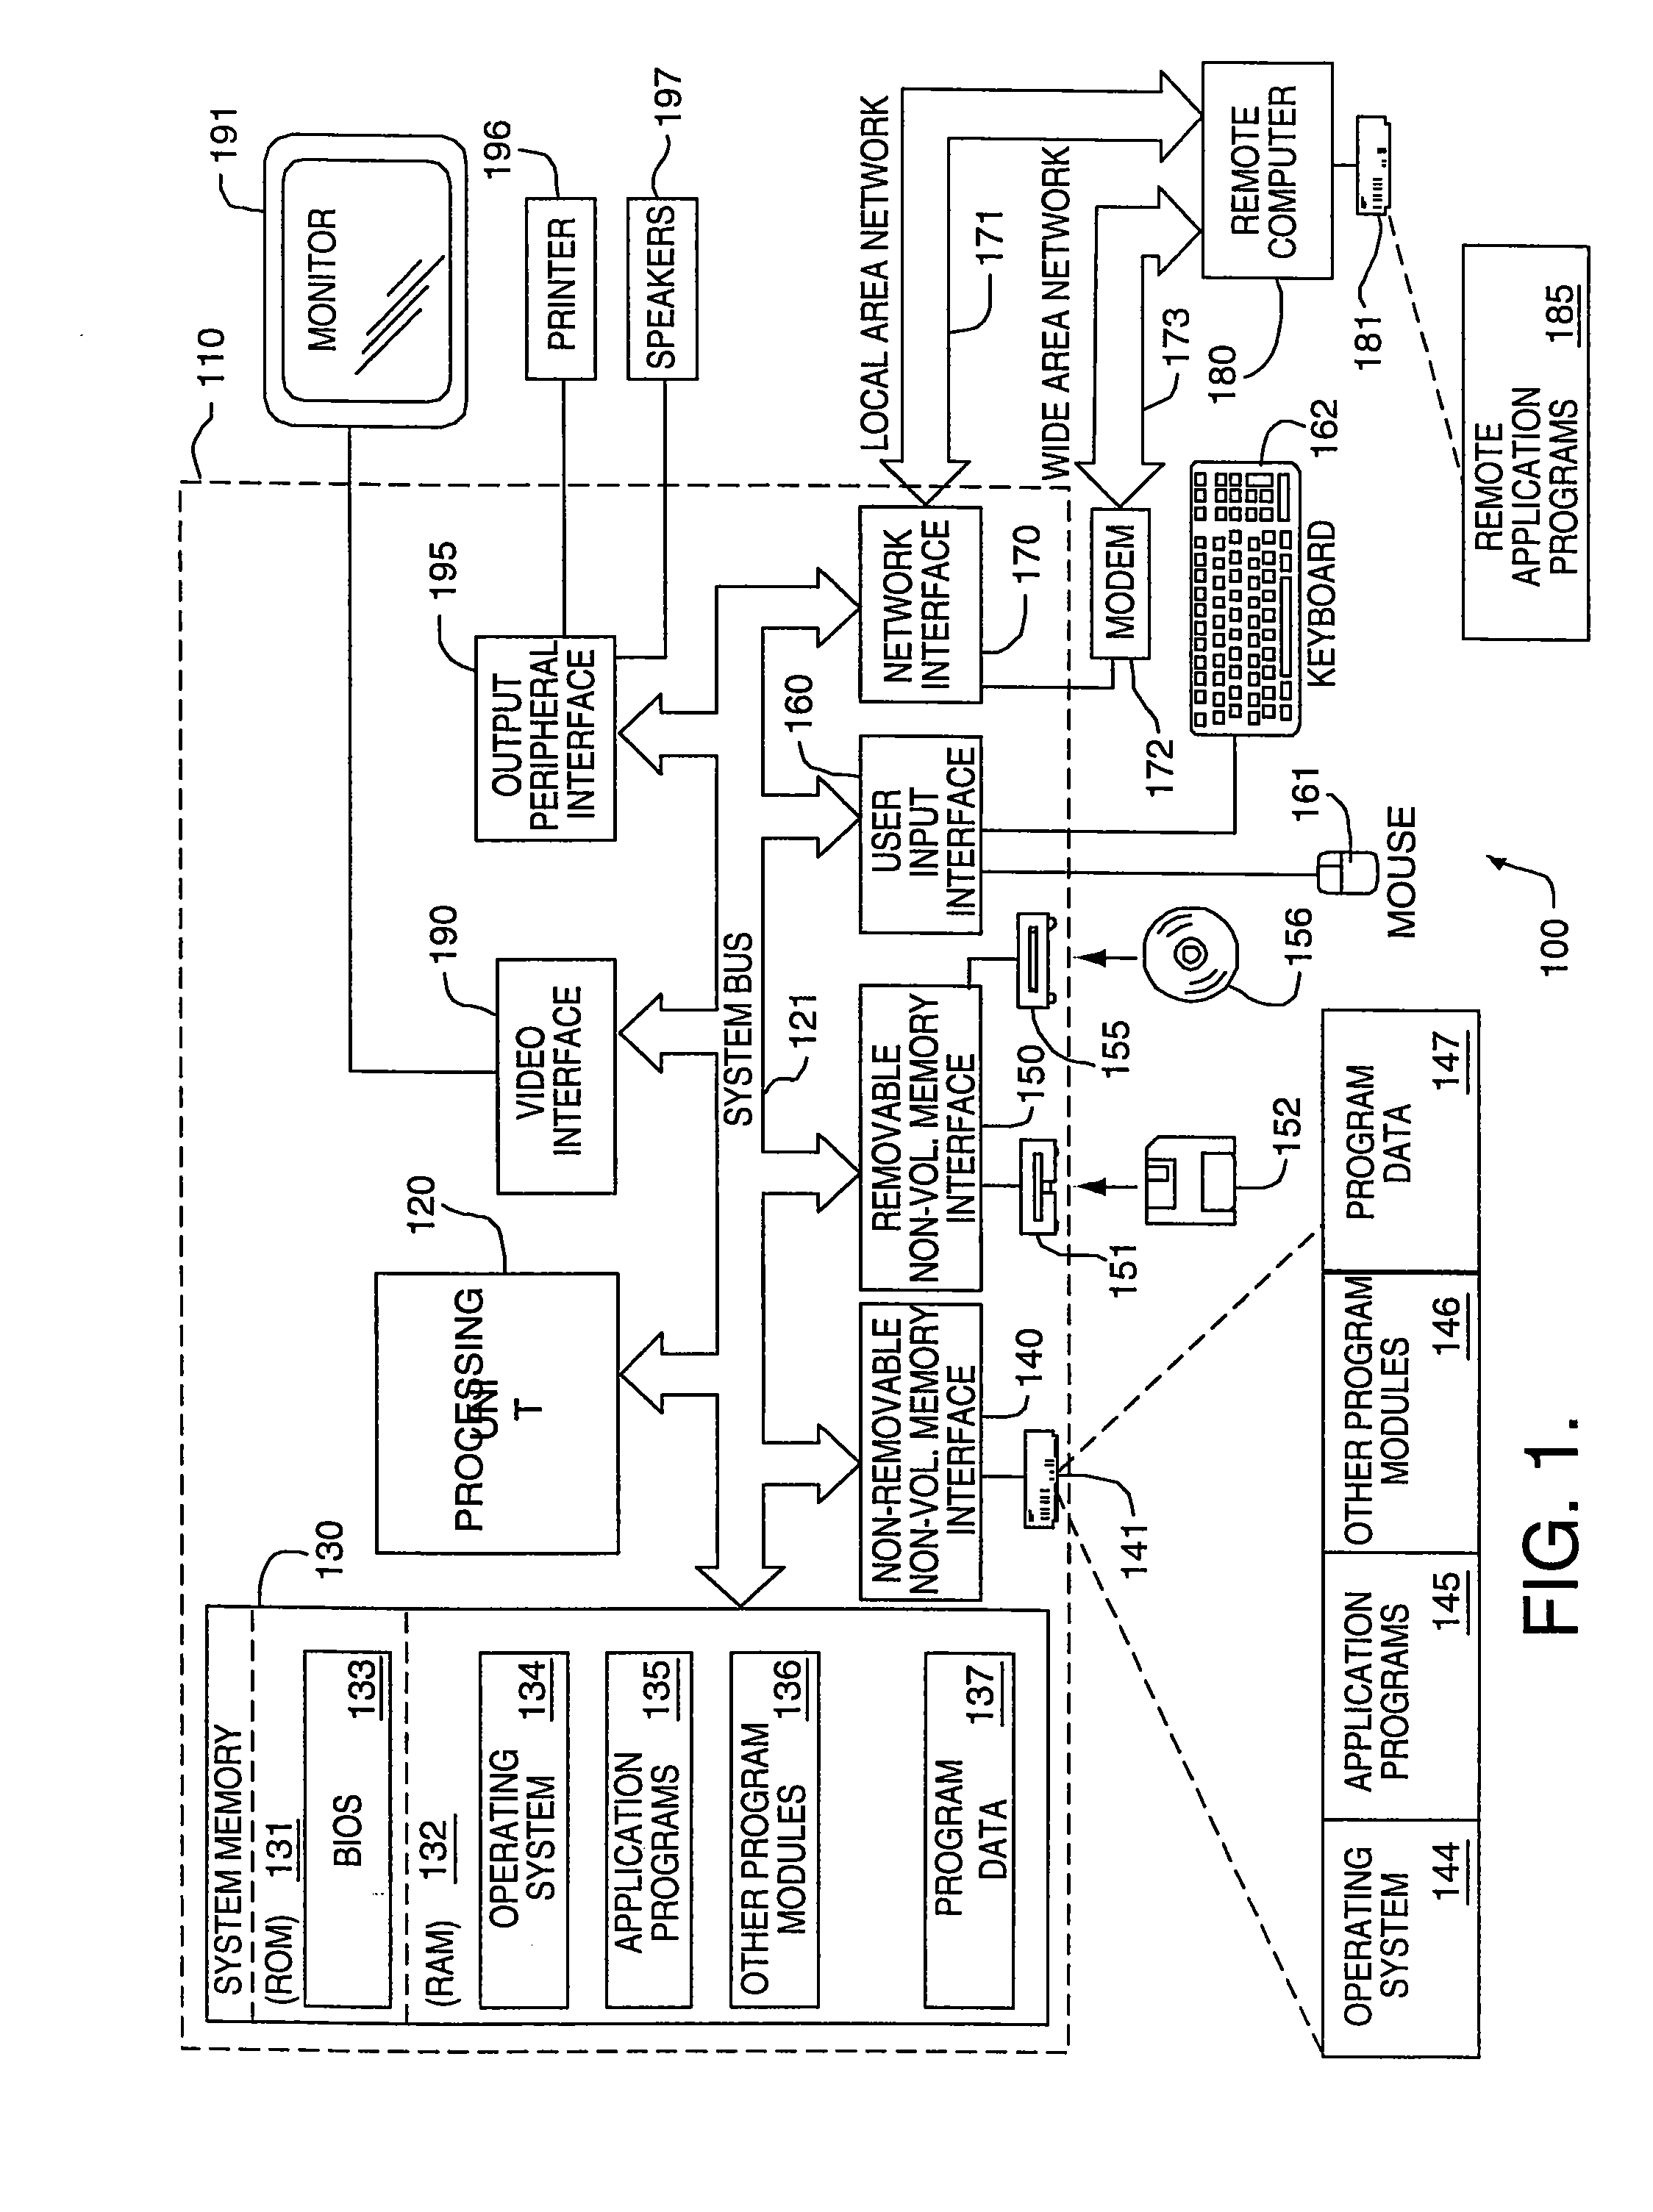 System and method for presenting the contents of a content collection based on content type